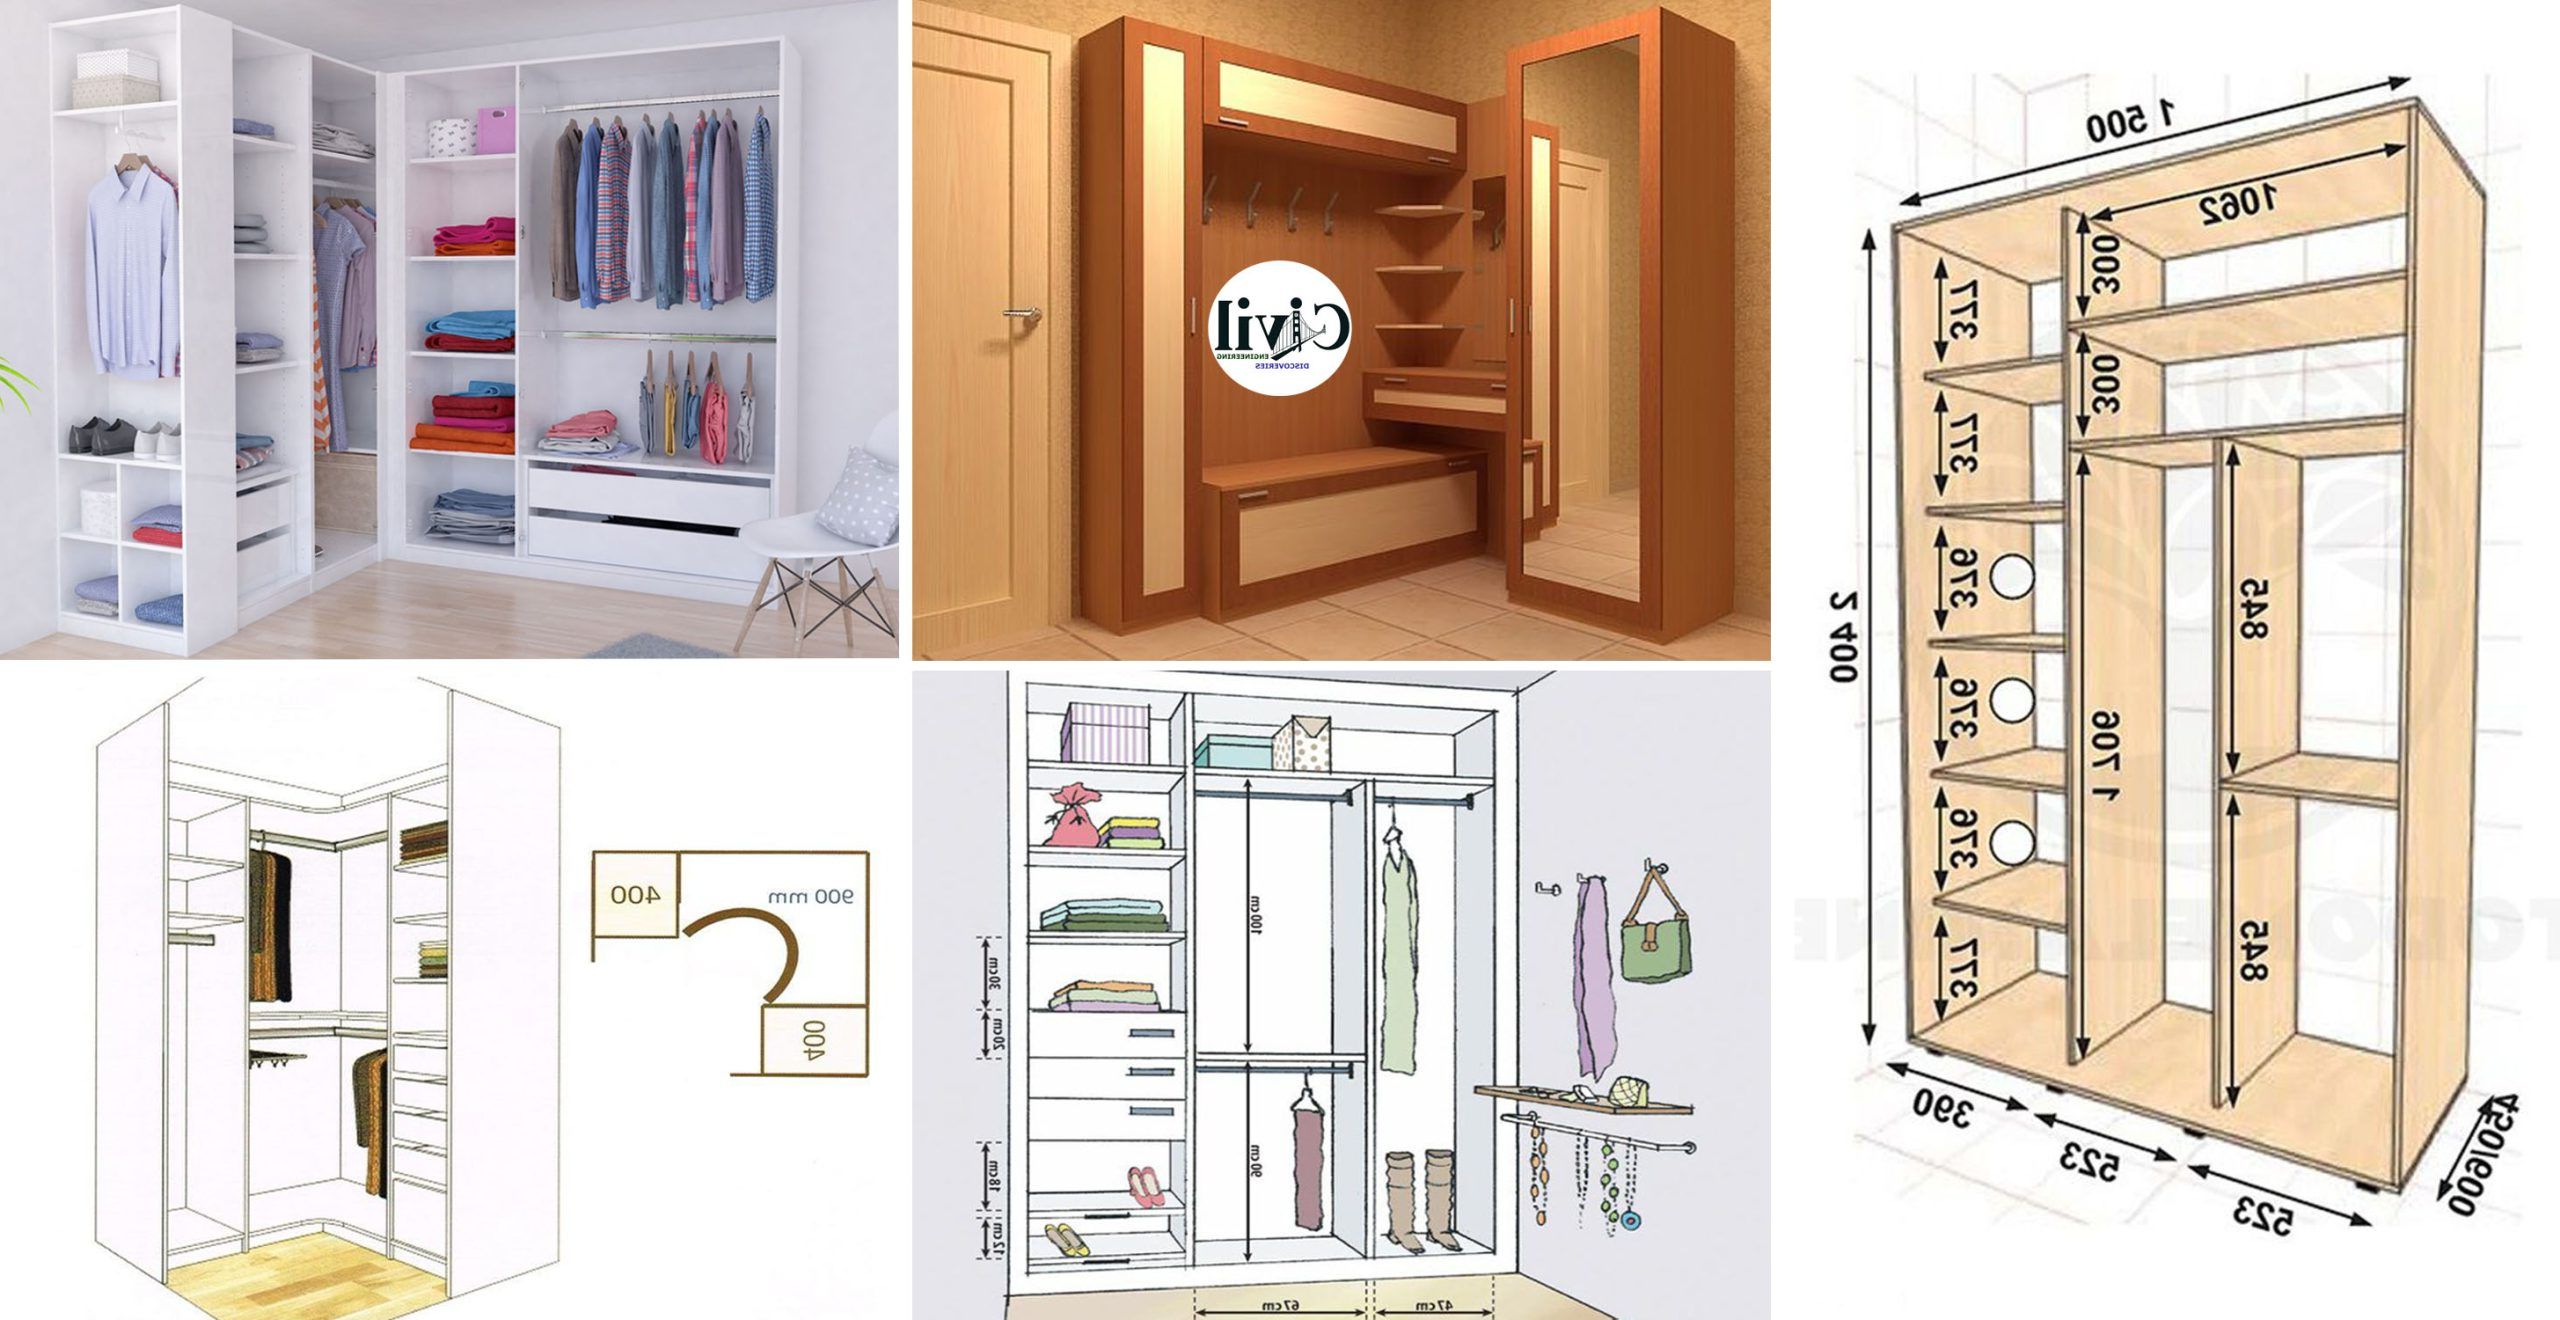 Space Saving Wardrobe Design Ideas You Need To Try | Engineering Discoveries Intended For Space Saving Wardrobes (View 12 of 20)